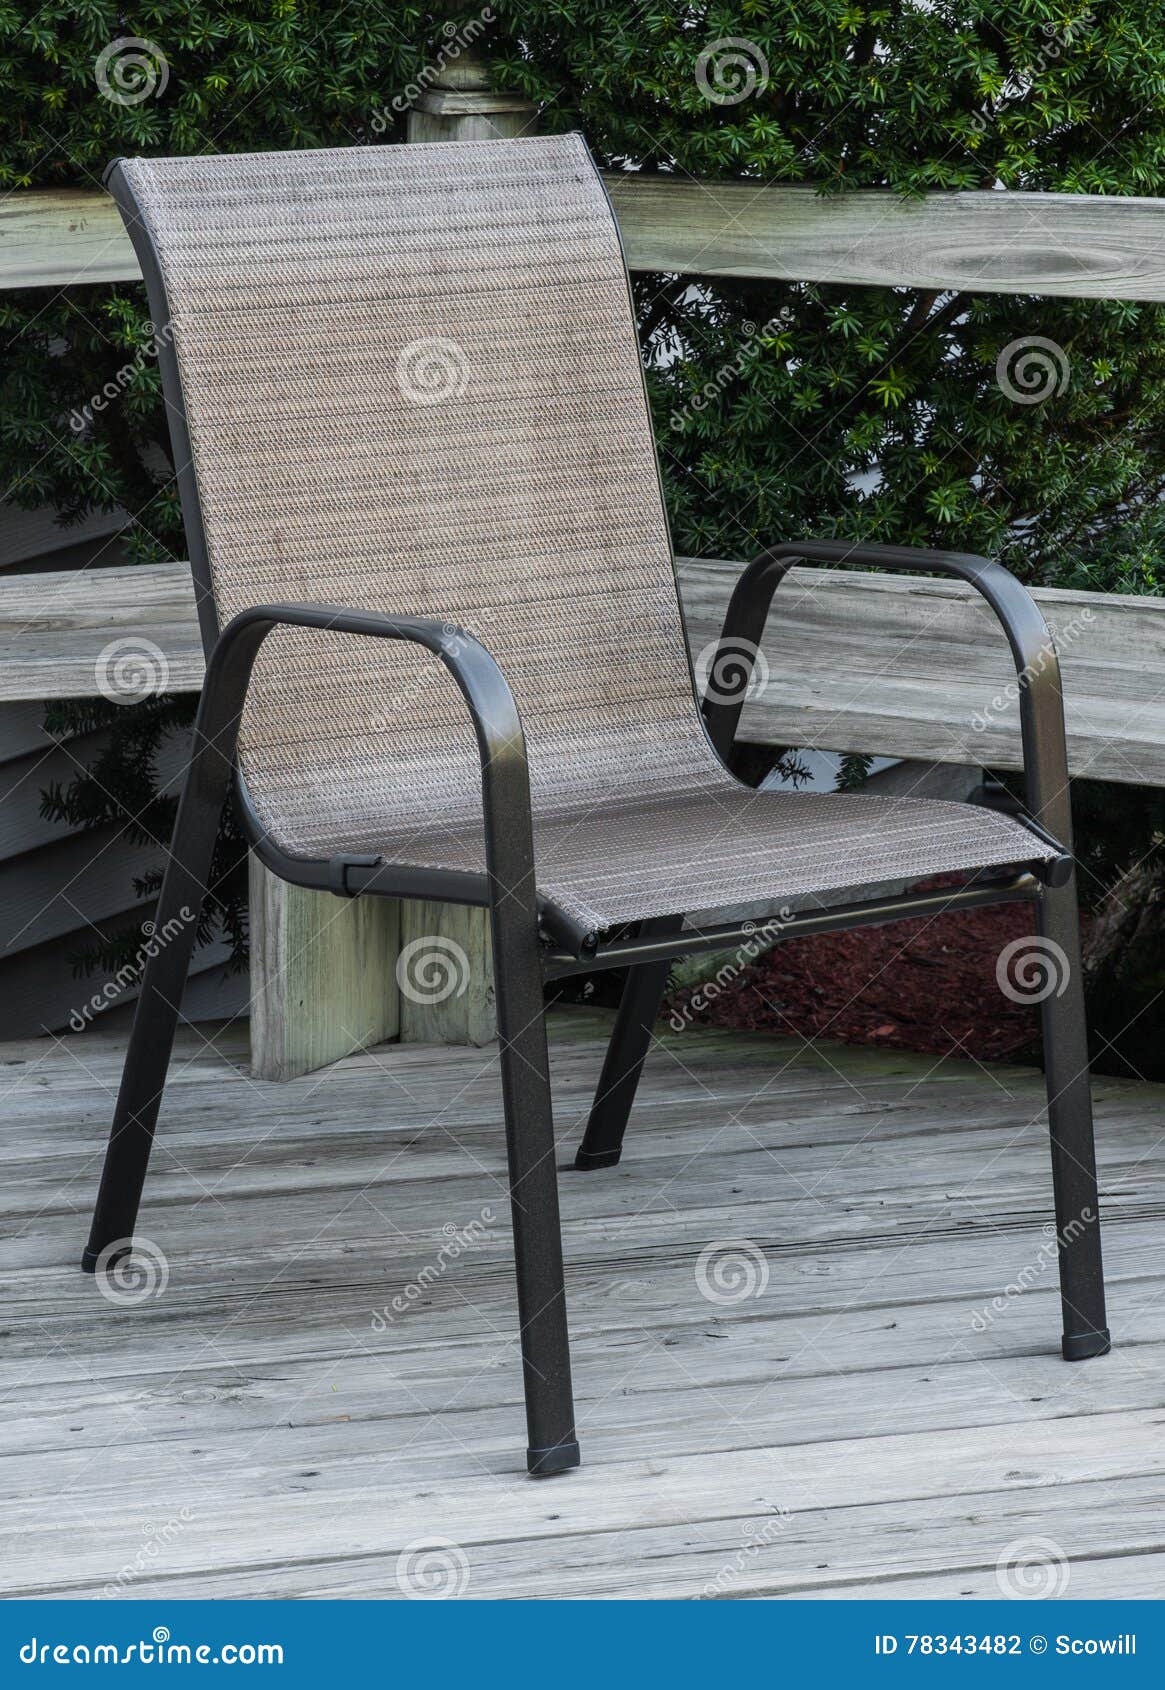 Wobbly Deck Chair Stock Photo Image Of Deck Legs Foliage 78343482